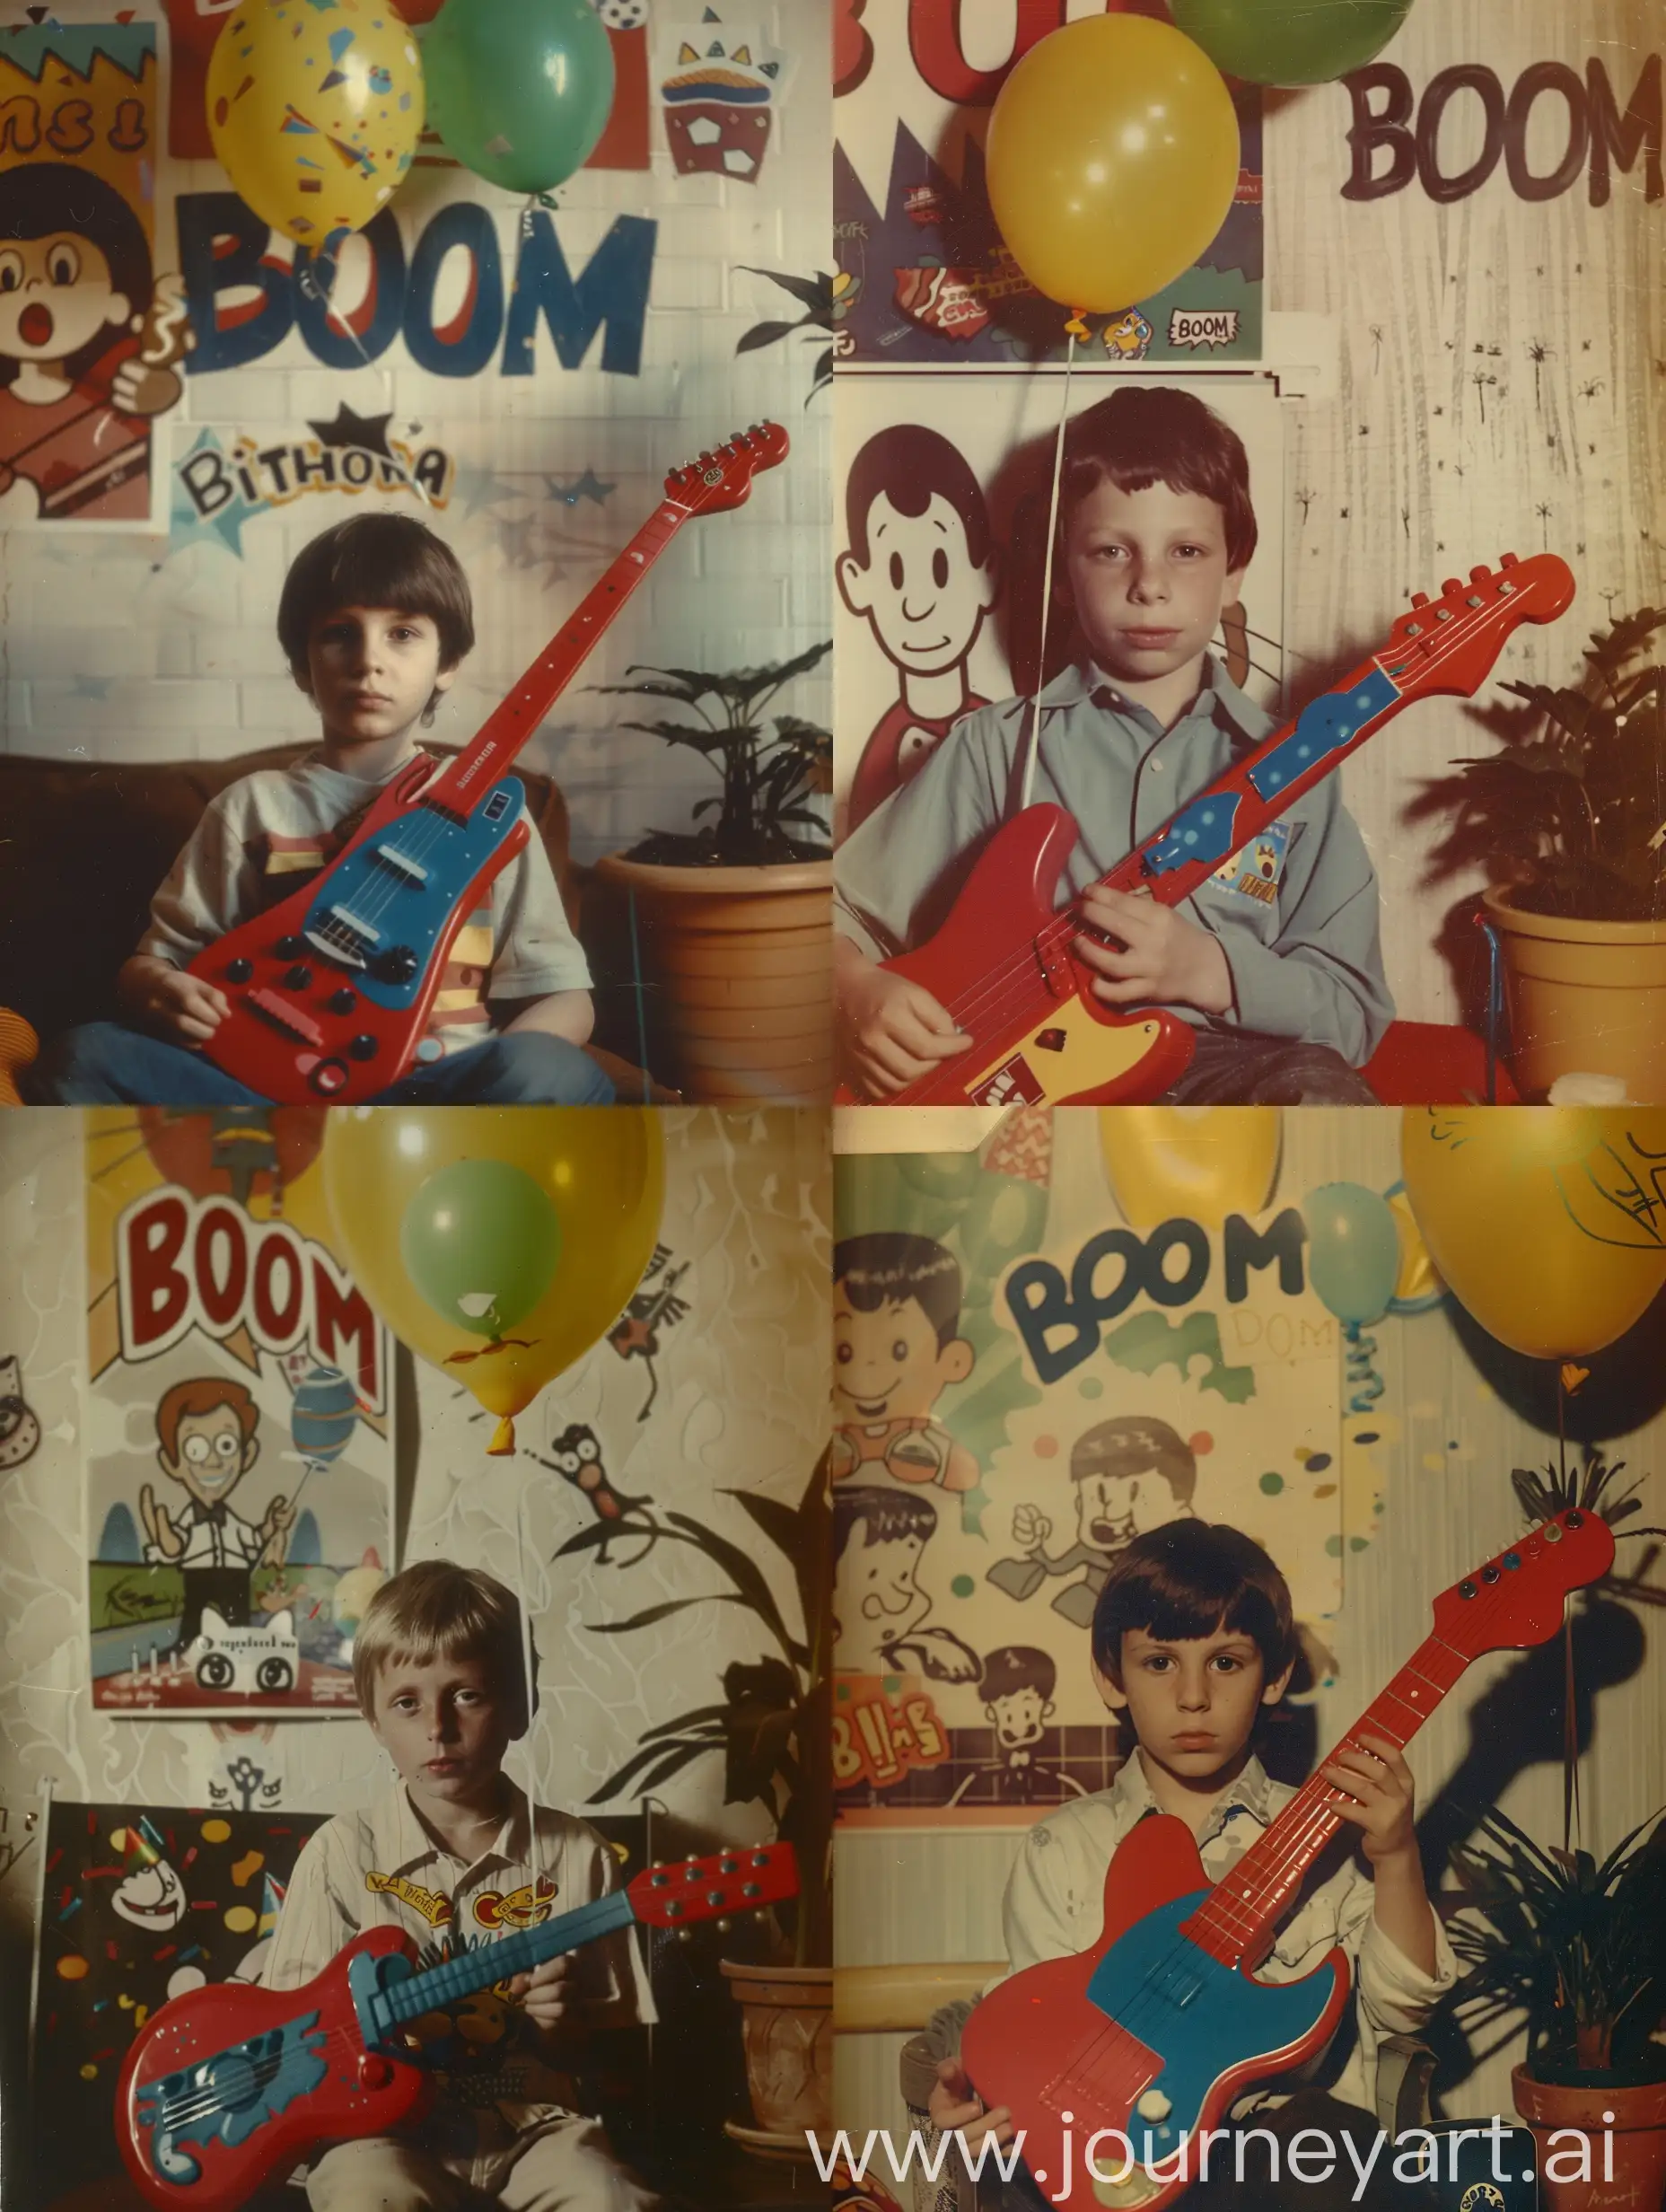 The vintage photo poor quality features an boy seated, holding a red toy electric-guitar with blue elements. Behind them is a wall with a cartoon character poster, and a yellow green birthday balloon's floats above their head. To the right, there's a potted plant. The wall text reads "BOOM." The setting suggests a casual, festive atmosphere—perhaps during a party or celebration --style raw